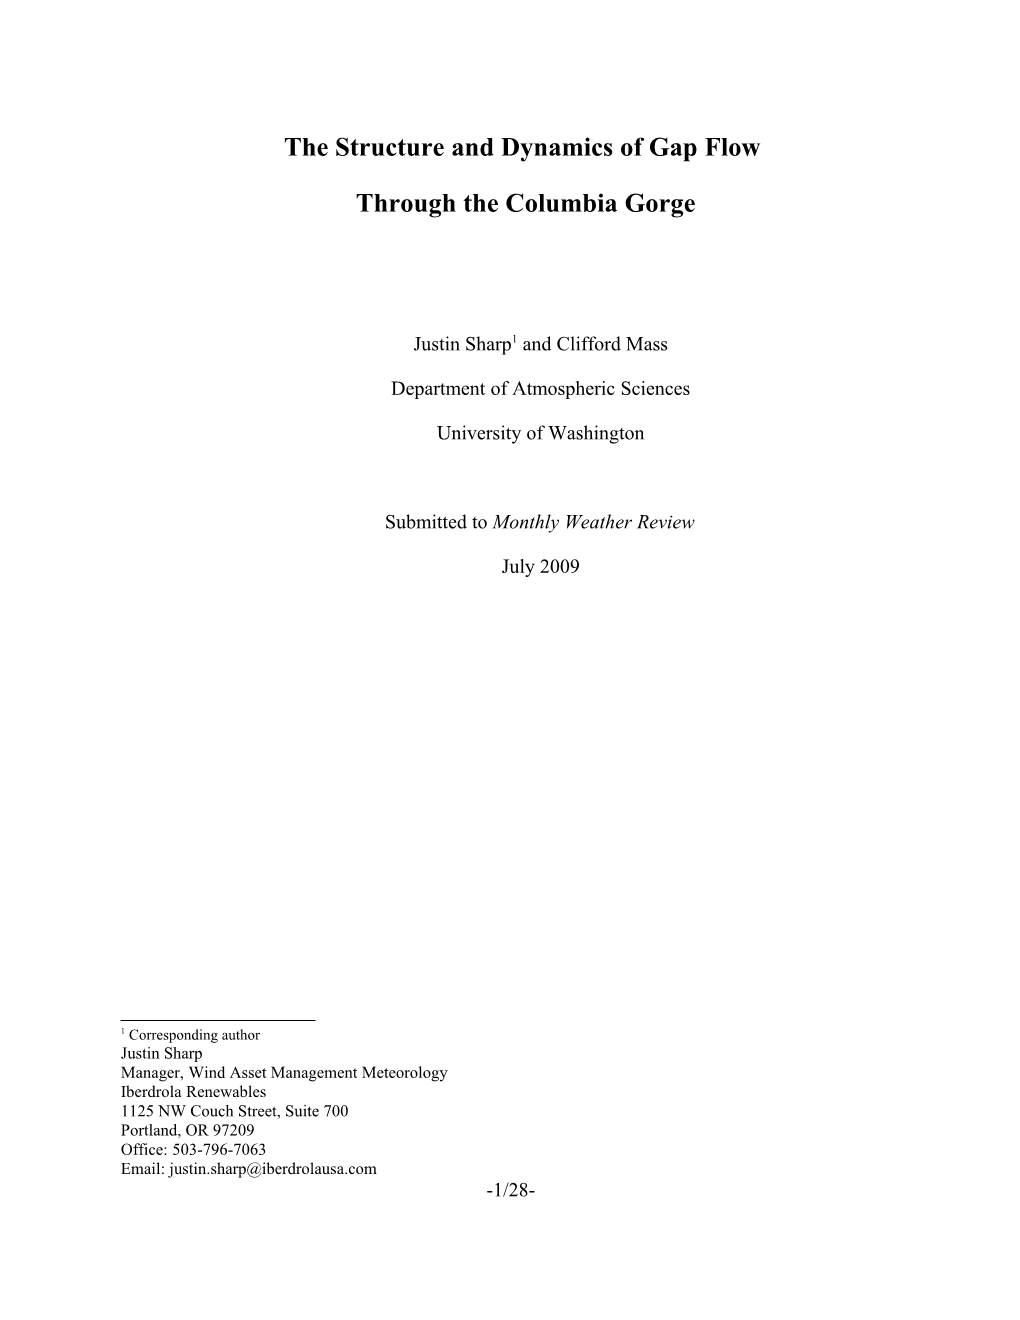 The Mesoscale Meteorology of the Columbia River Gorge